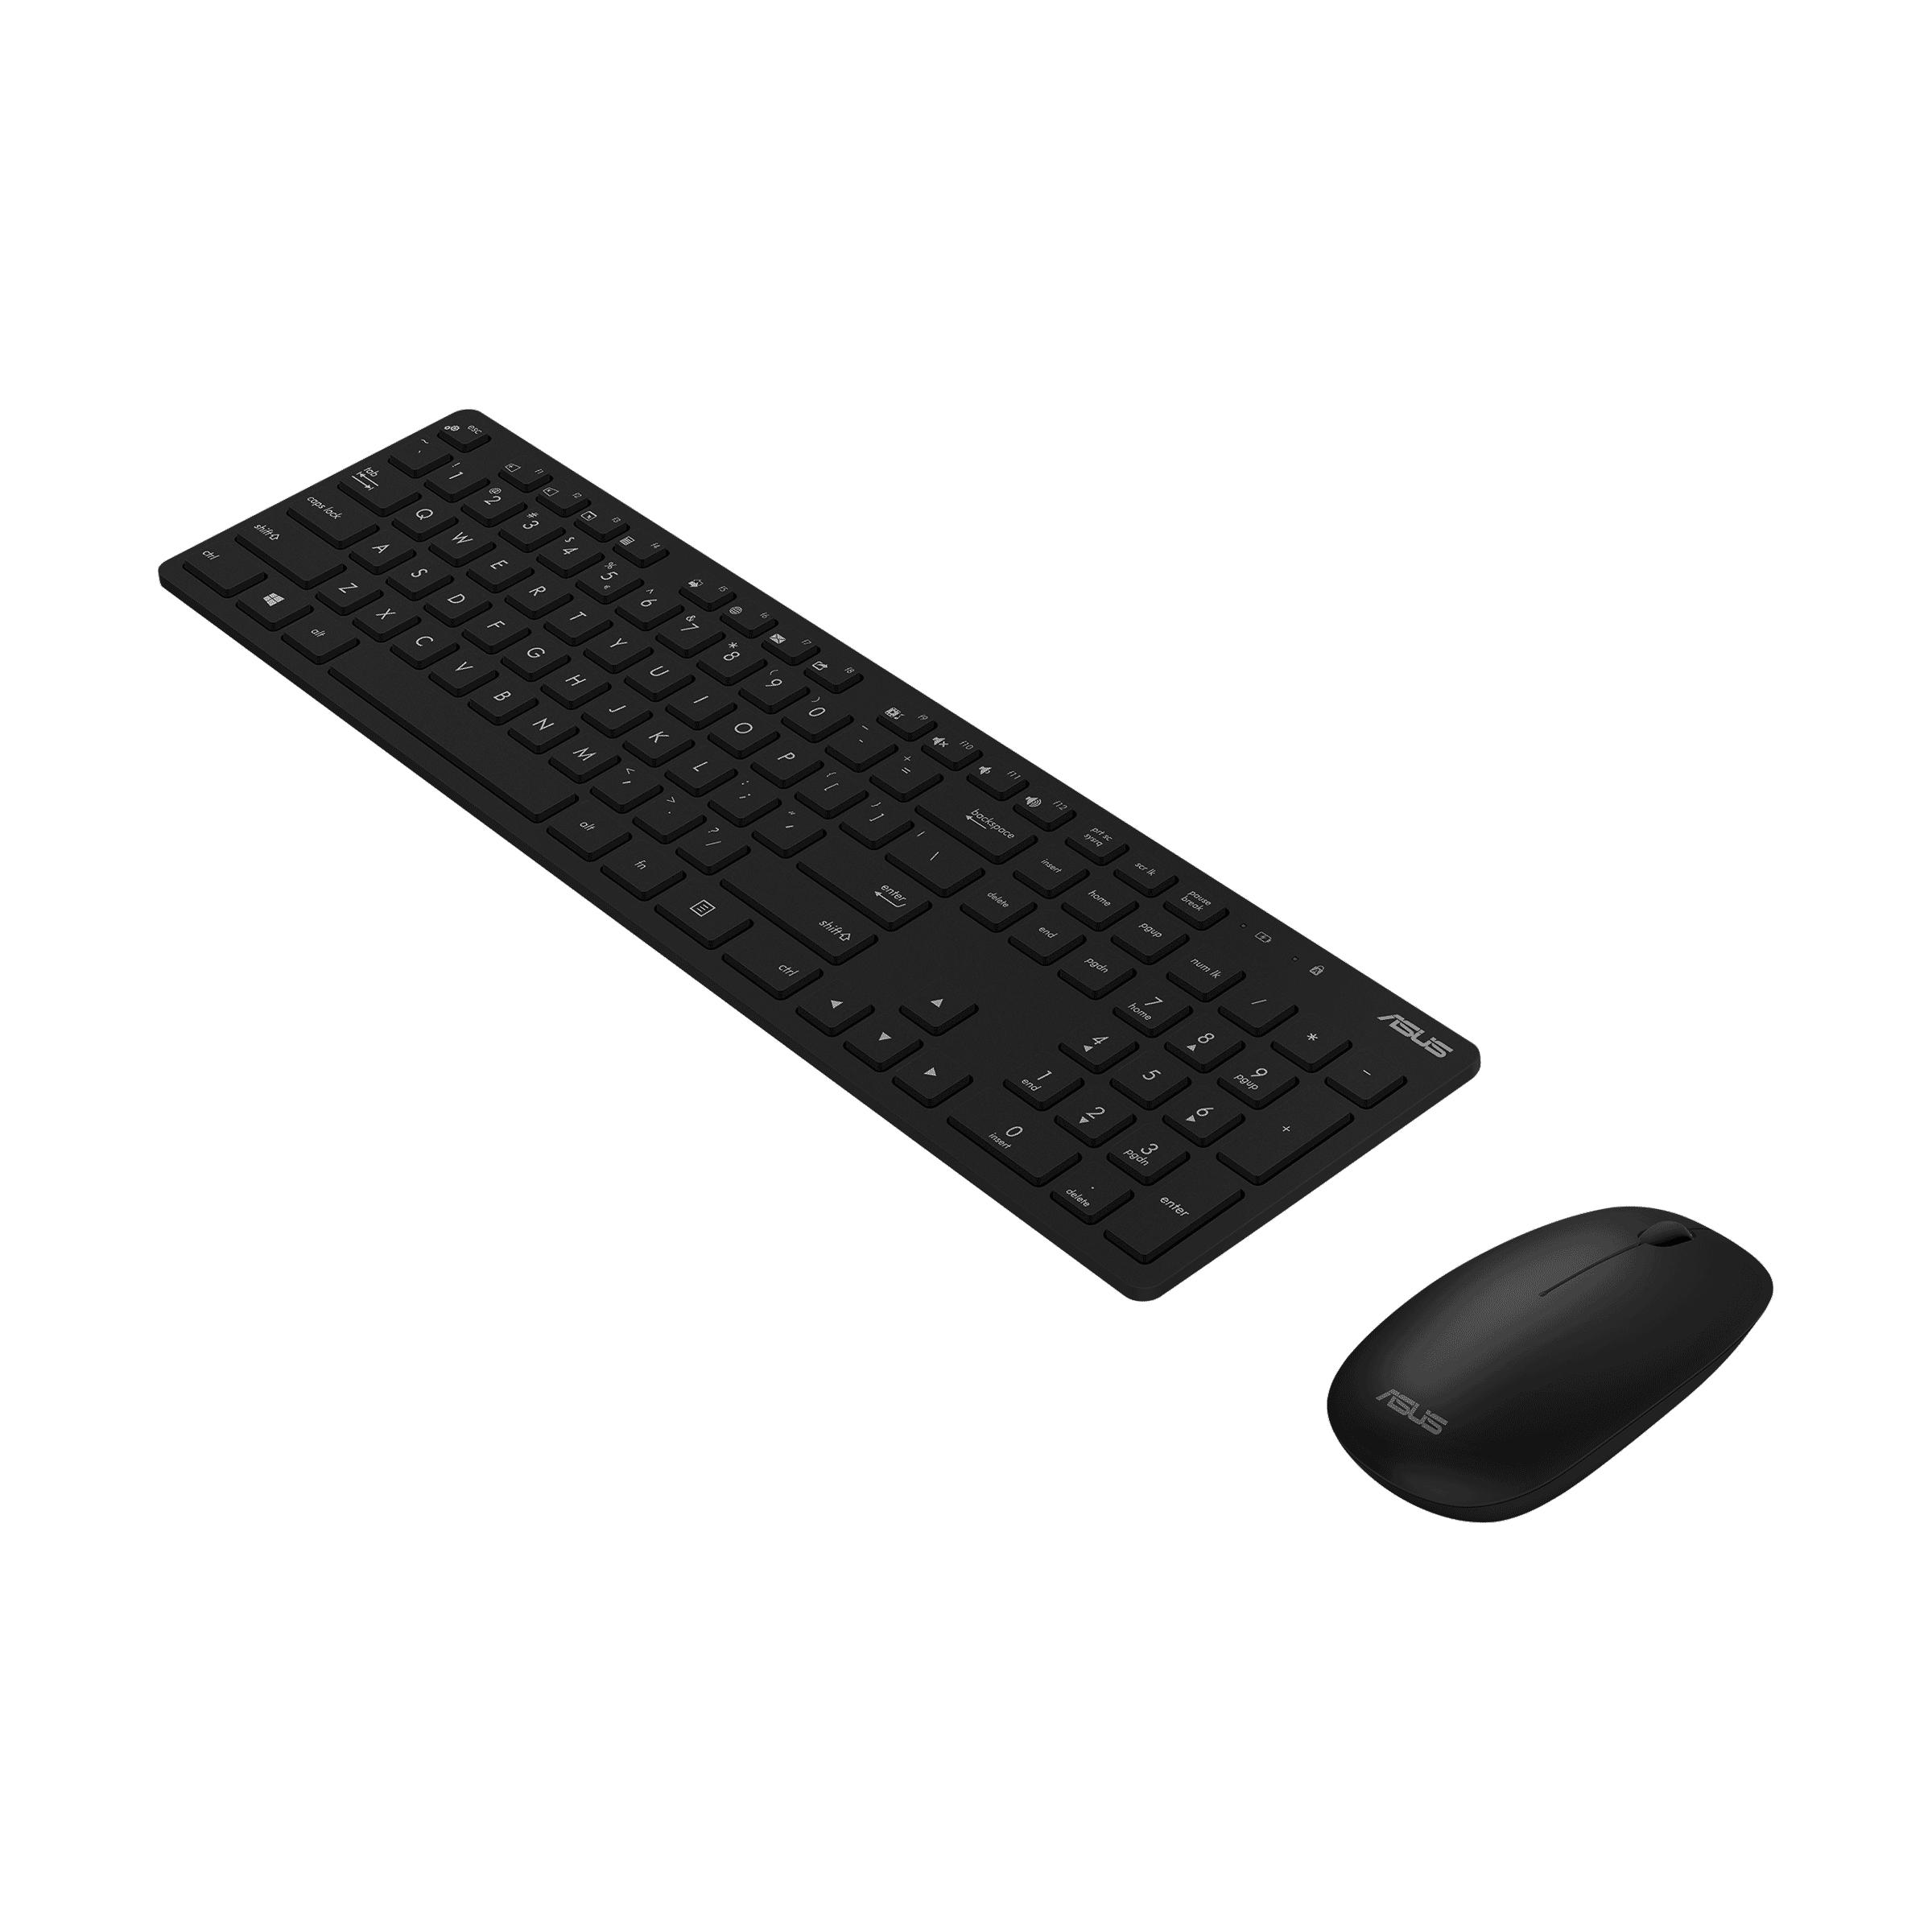 Asus W5000 Wireless Keyboard And Mouse Set Keyboards Asus Global